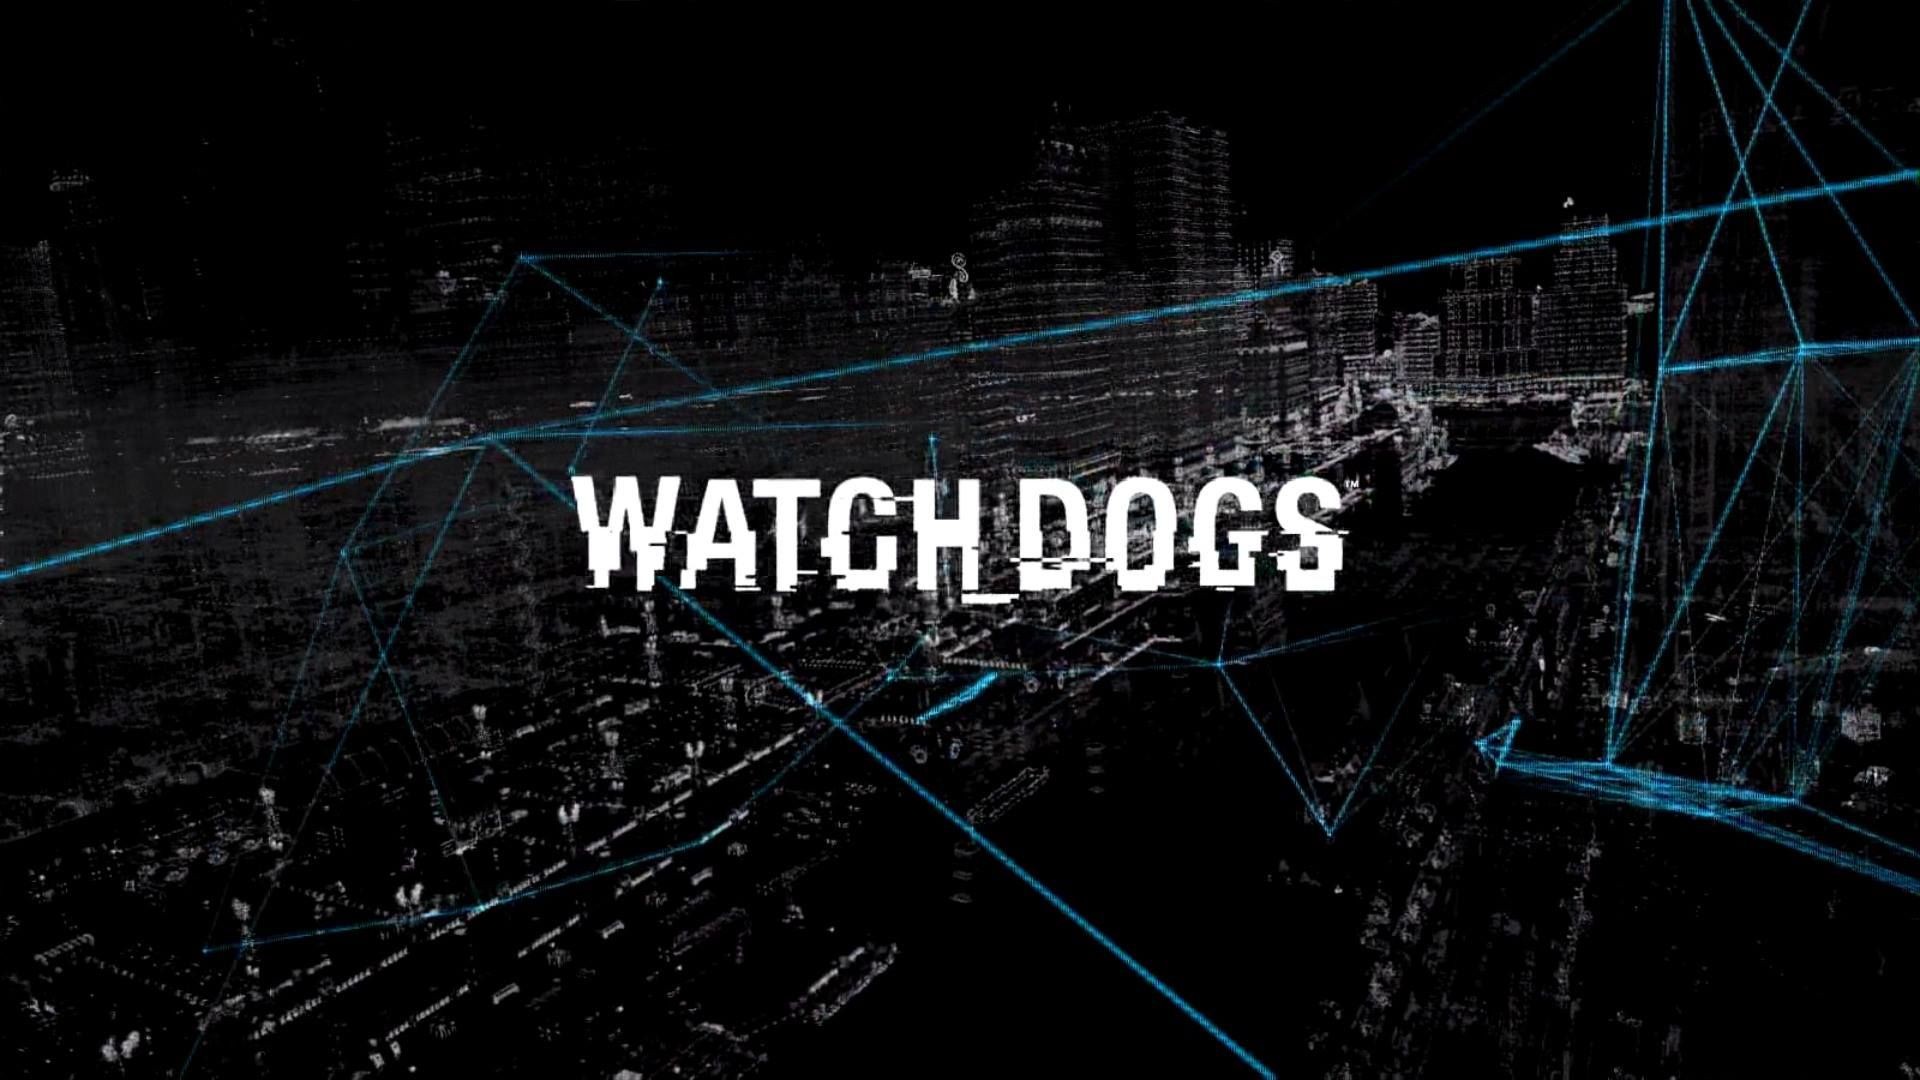 The watch dogs steam фото 103